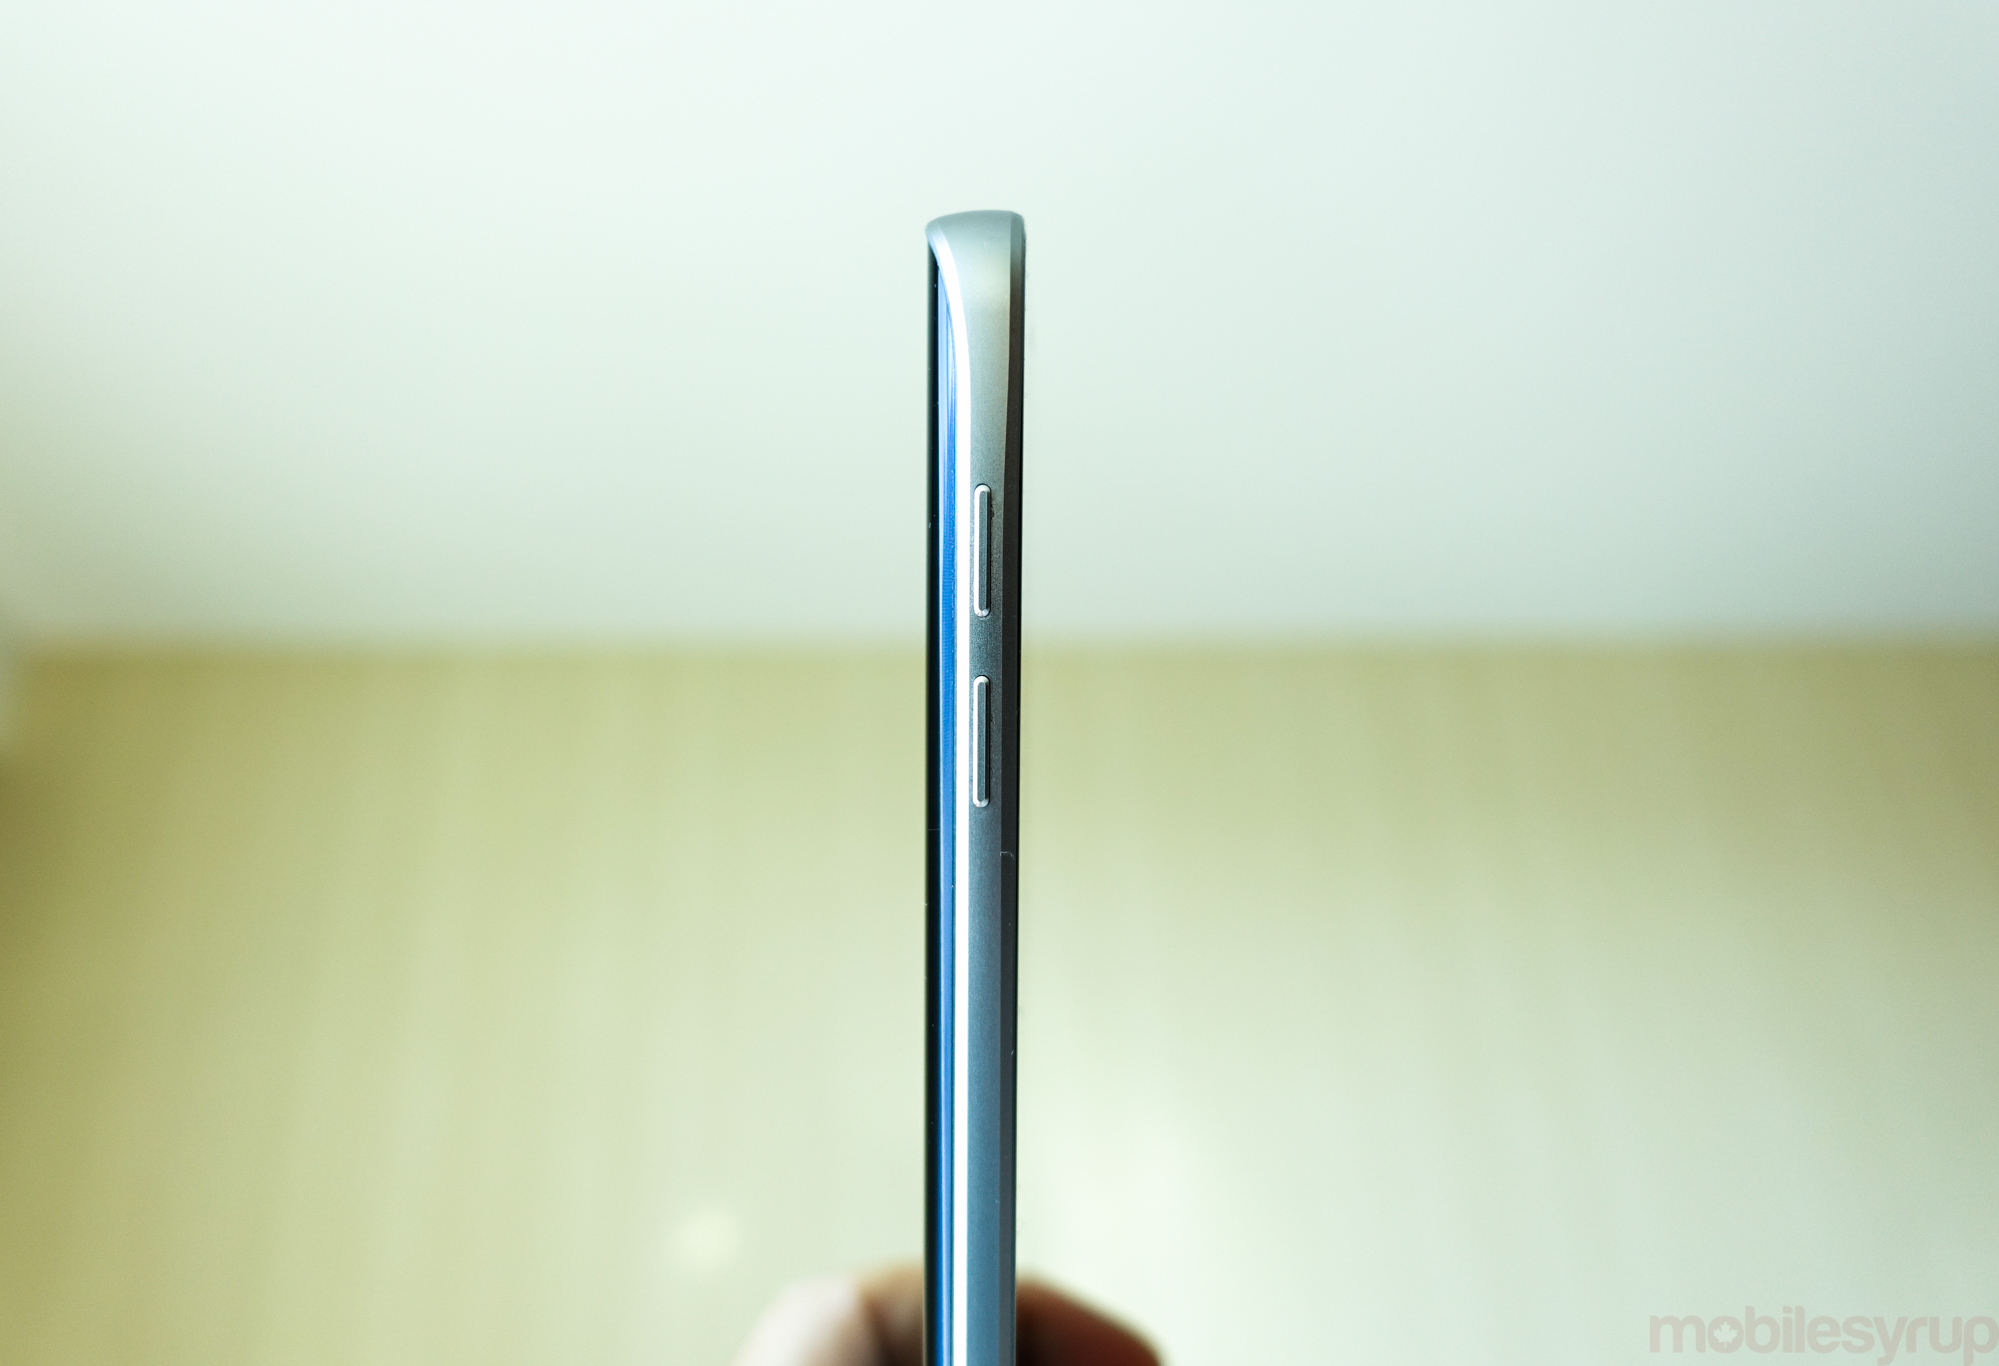 samsunggalaxynote5review-01041